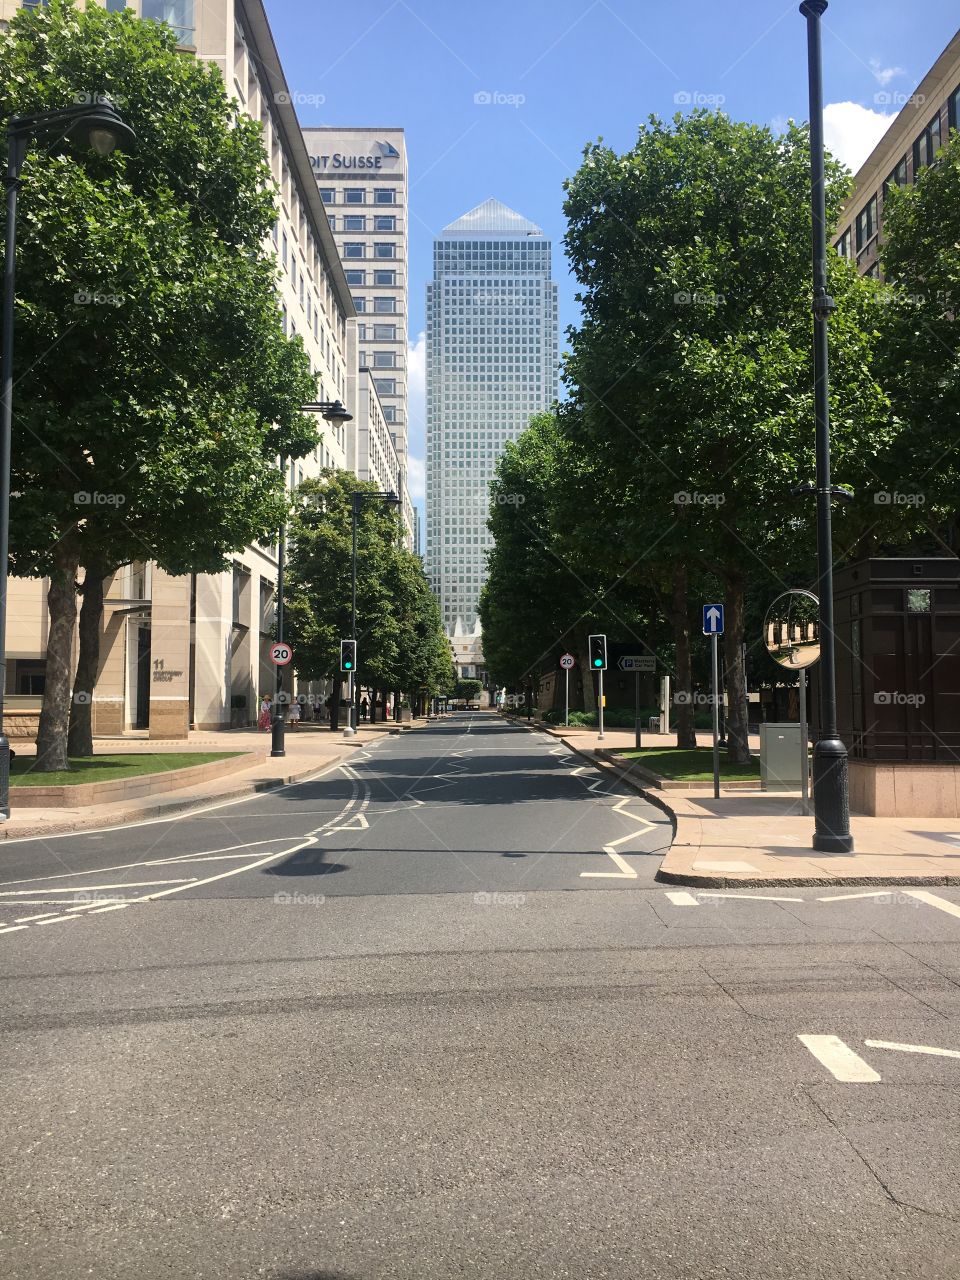 From Weatferry to West India avenue over the Cabot Square through Canary Wharf skyline.

#London #summerInLondon #summerInCanaryWharf